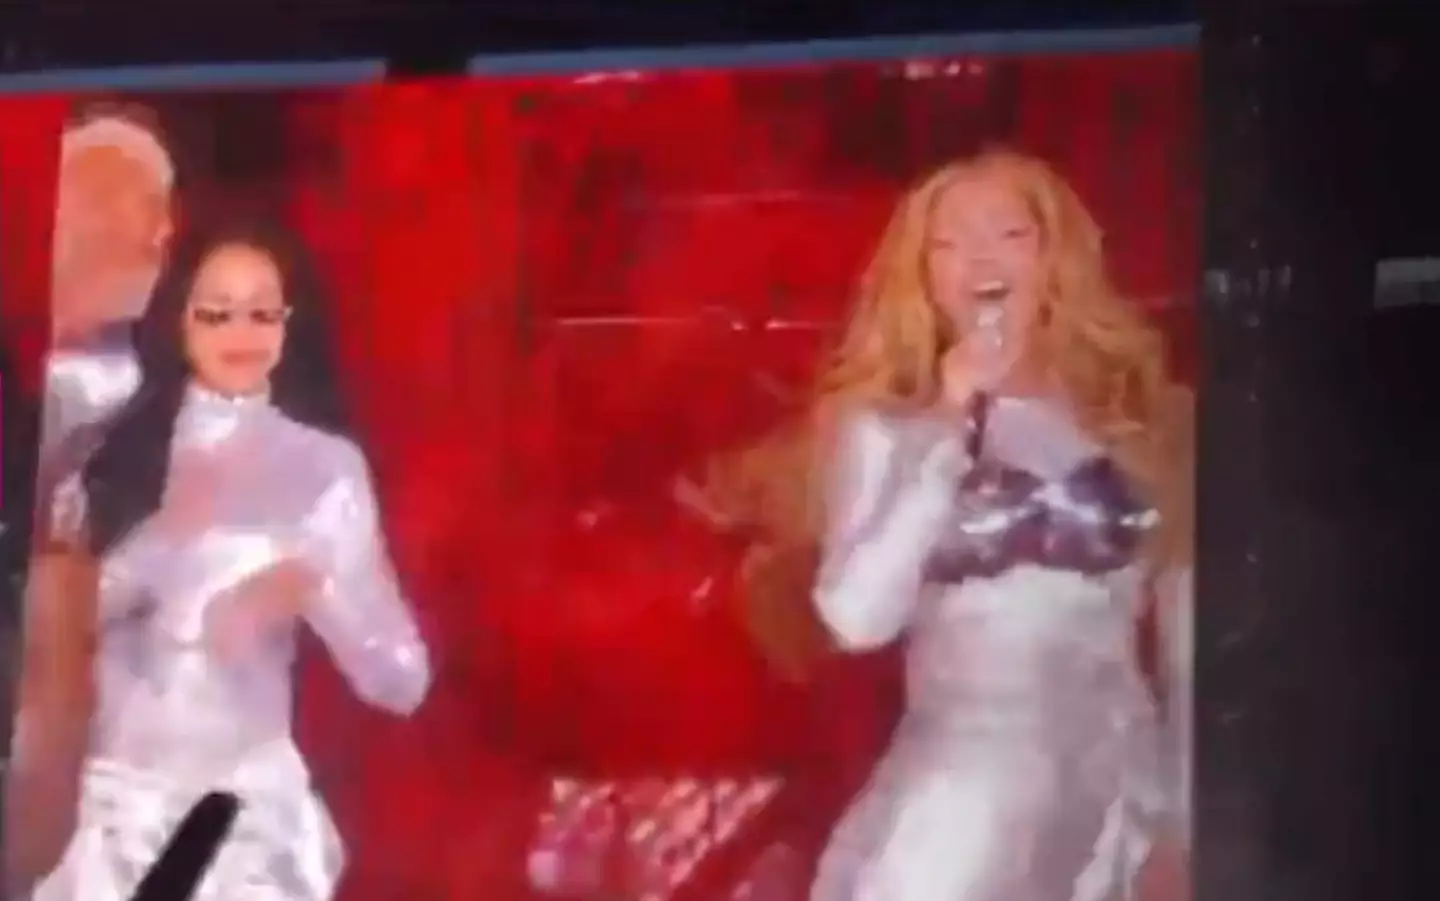 Blue Ivy joined her mom on stage in France.